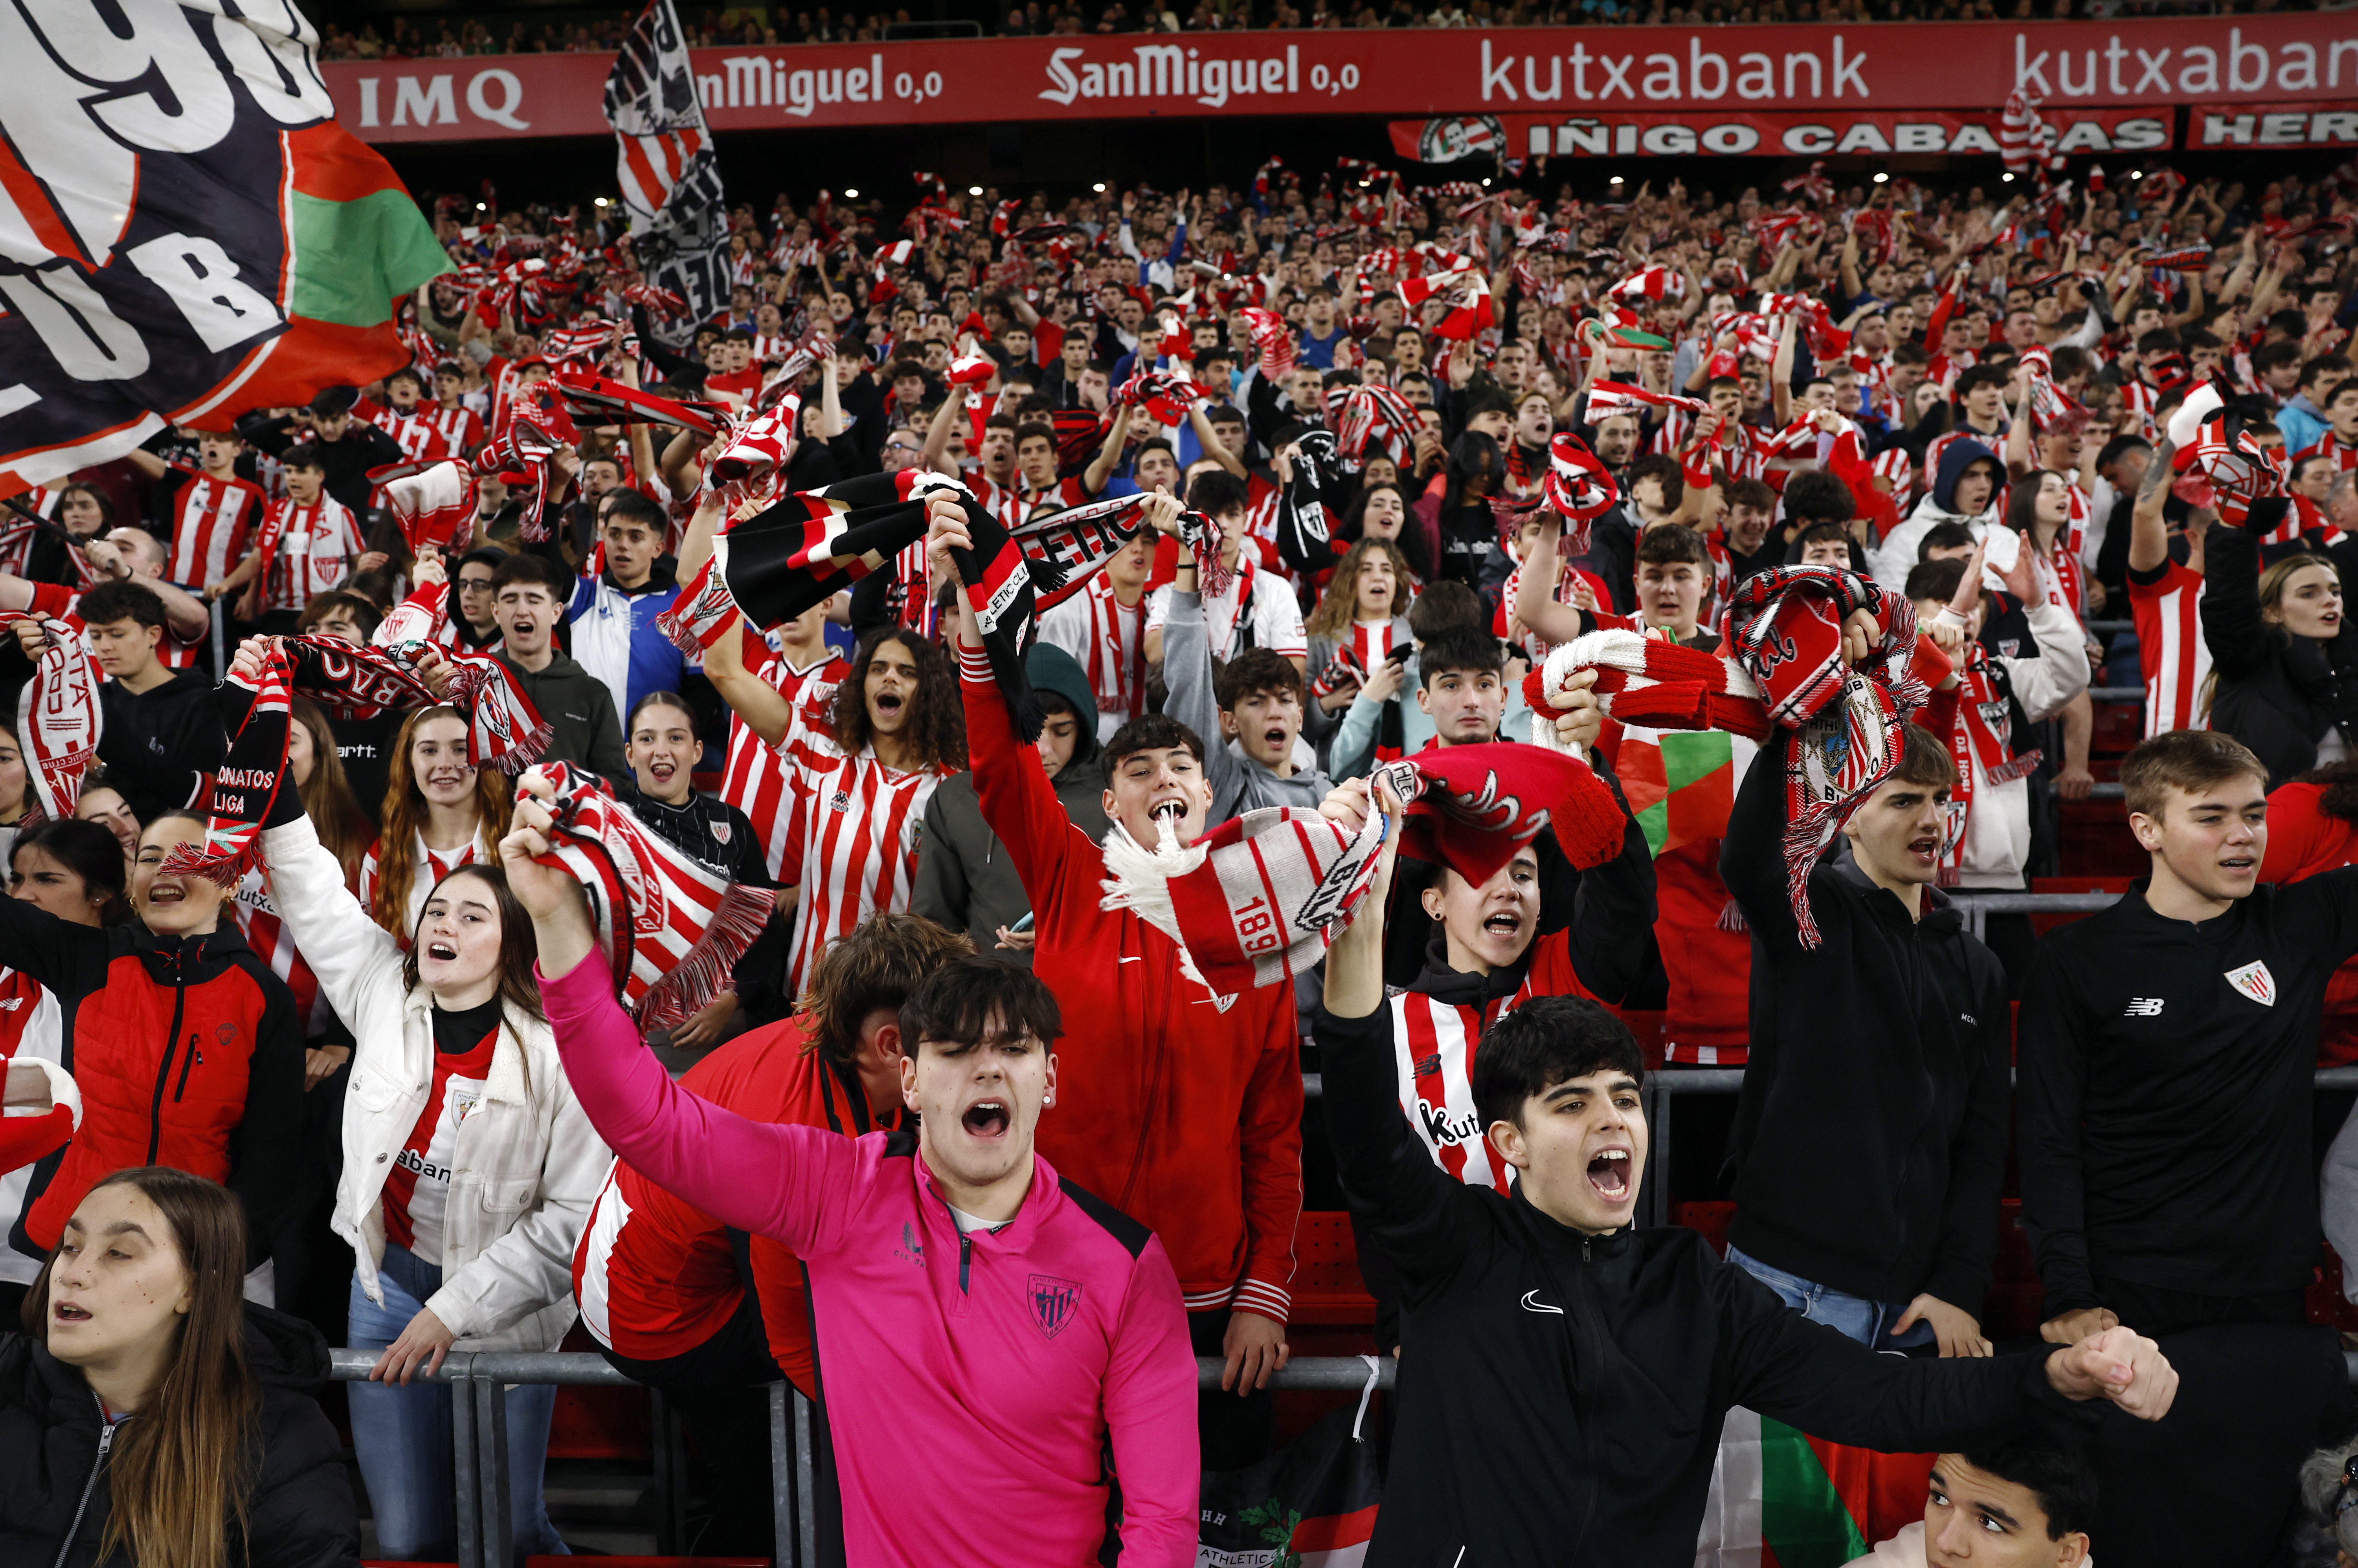 Athletic Bilbao Overview